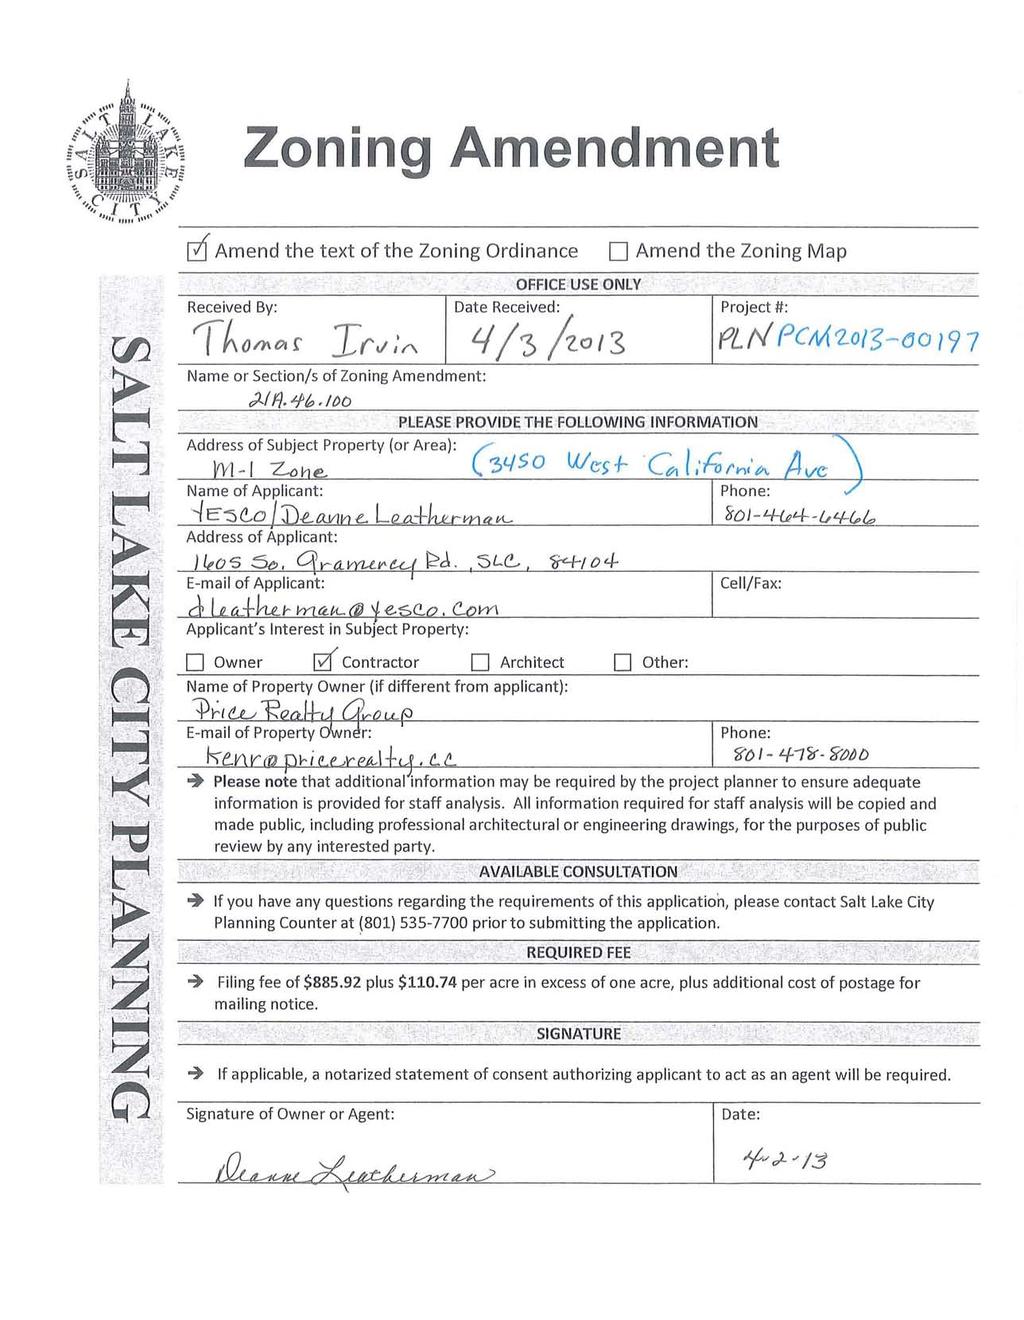 Zoning Amendment 0' Amend the text of the Zo ning Ordinance D Amend t he Zo ning Map Received By: 'ThOfl\O r Trv,'" Name or Section/s of Zoning Amendment: ;J../ ft 4'h.